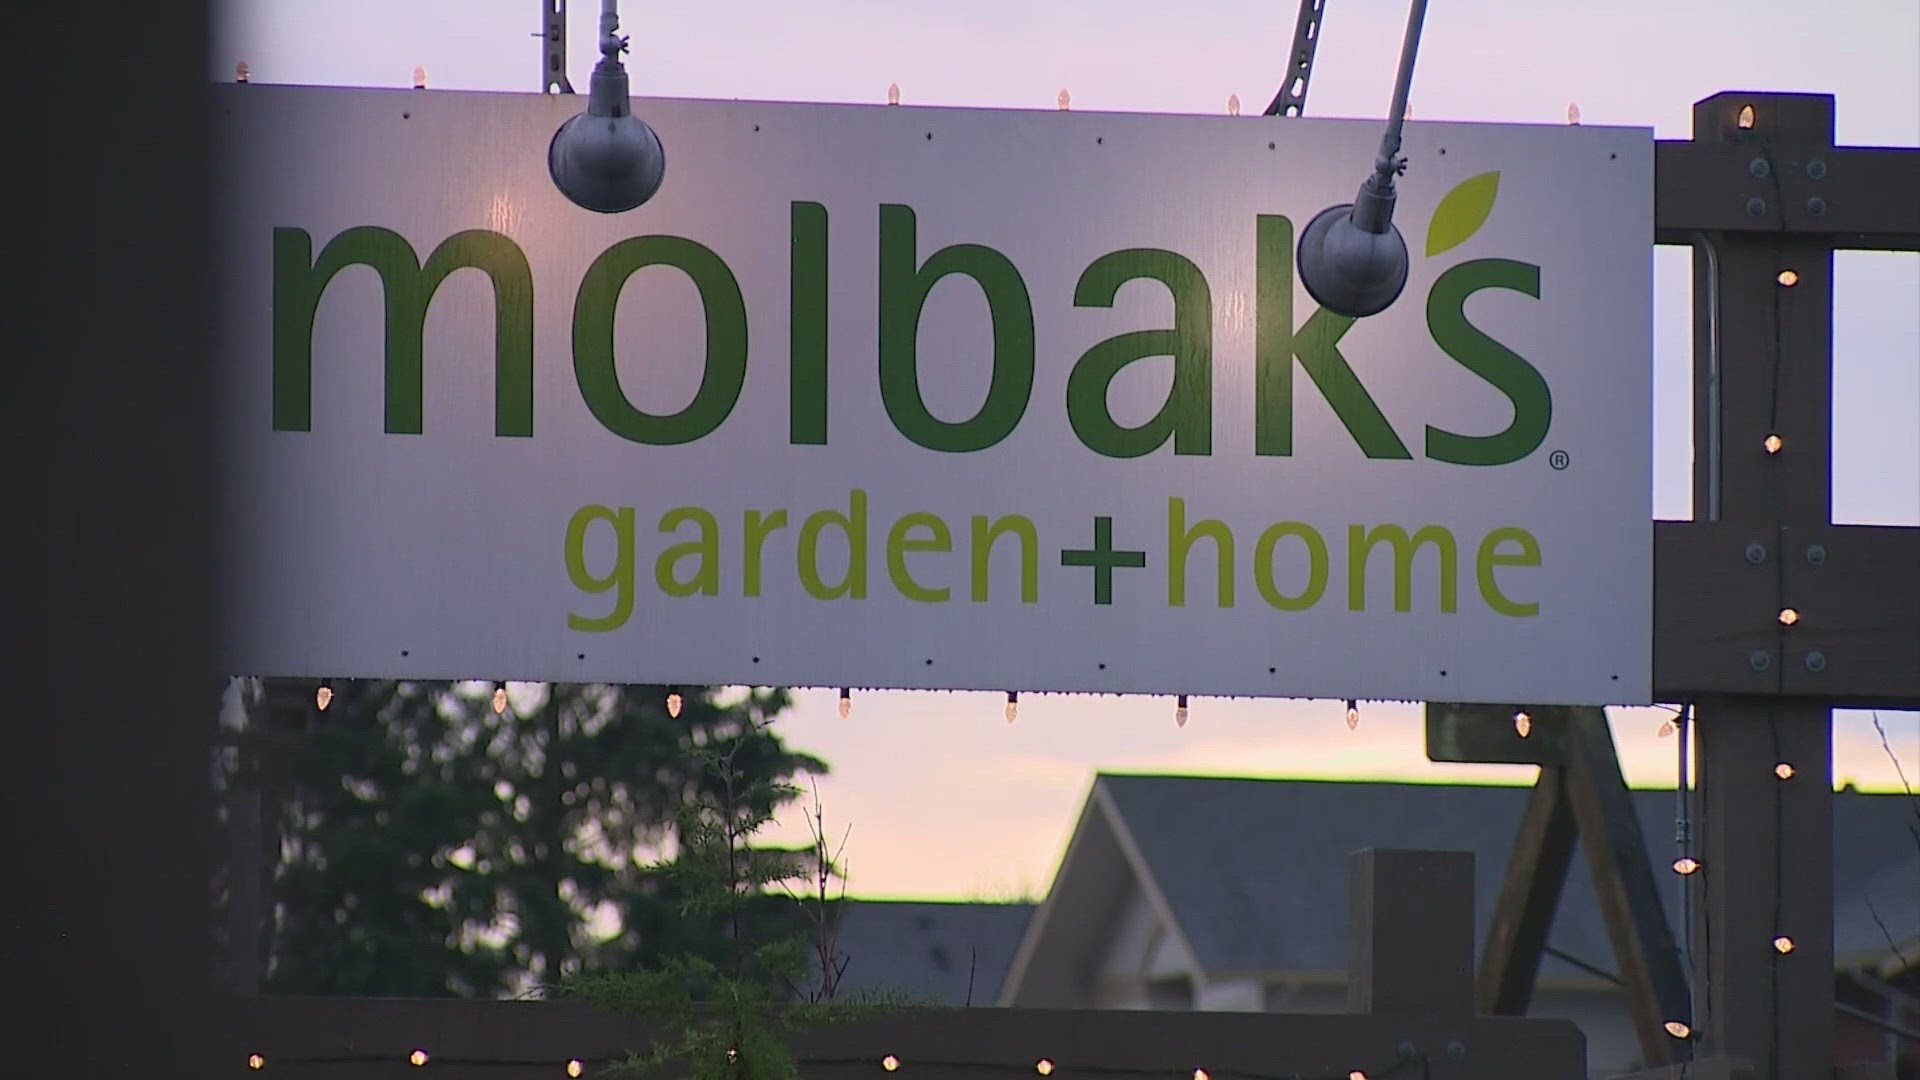 Molbak's said there weren't any financially viable options that would allow the garden store to continue operating in the way it wanted.